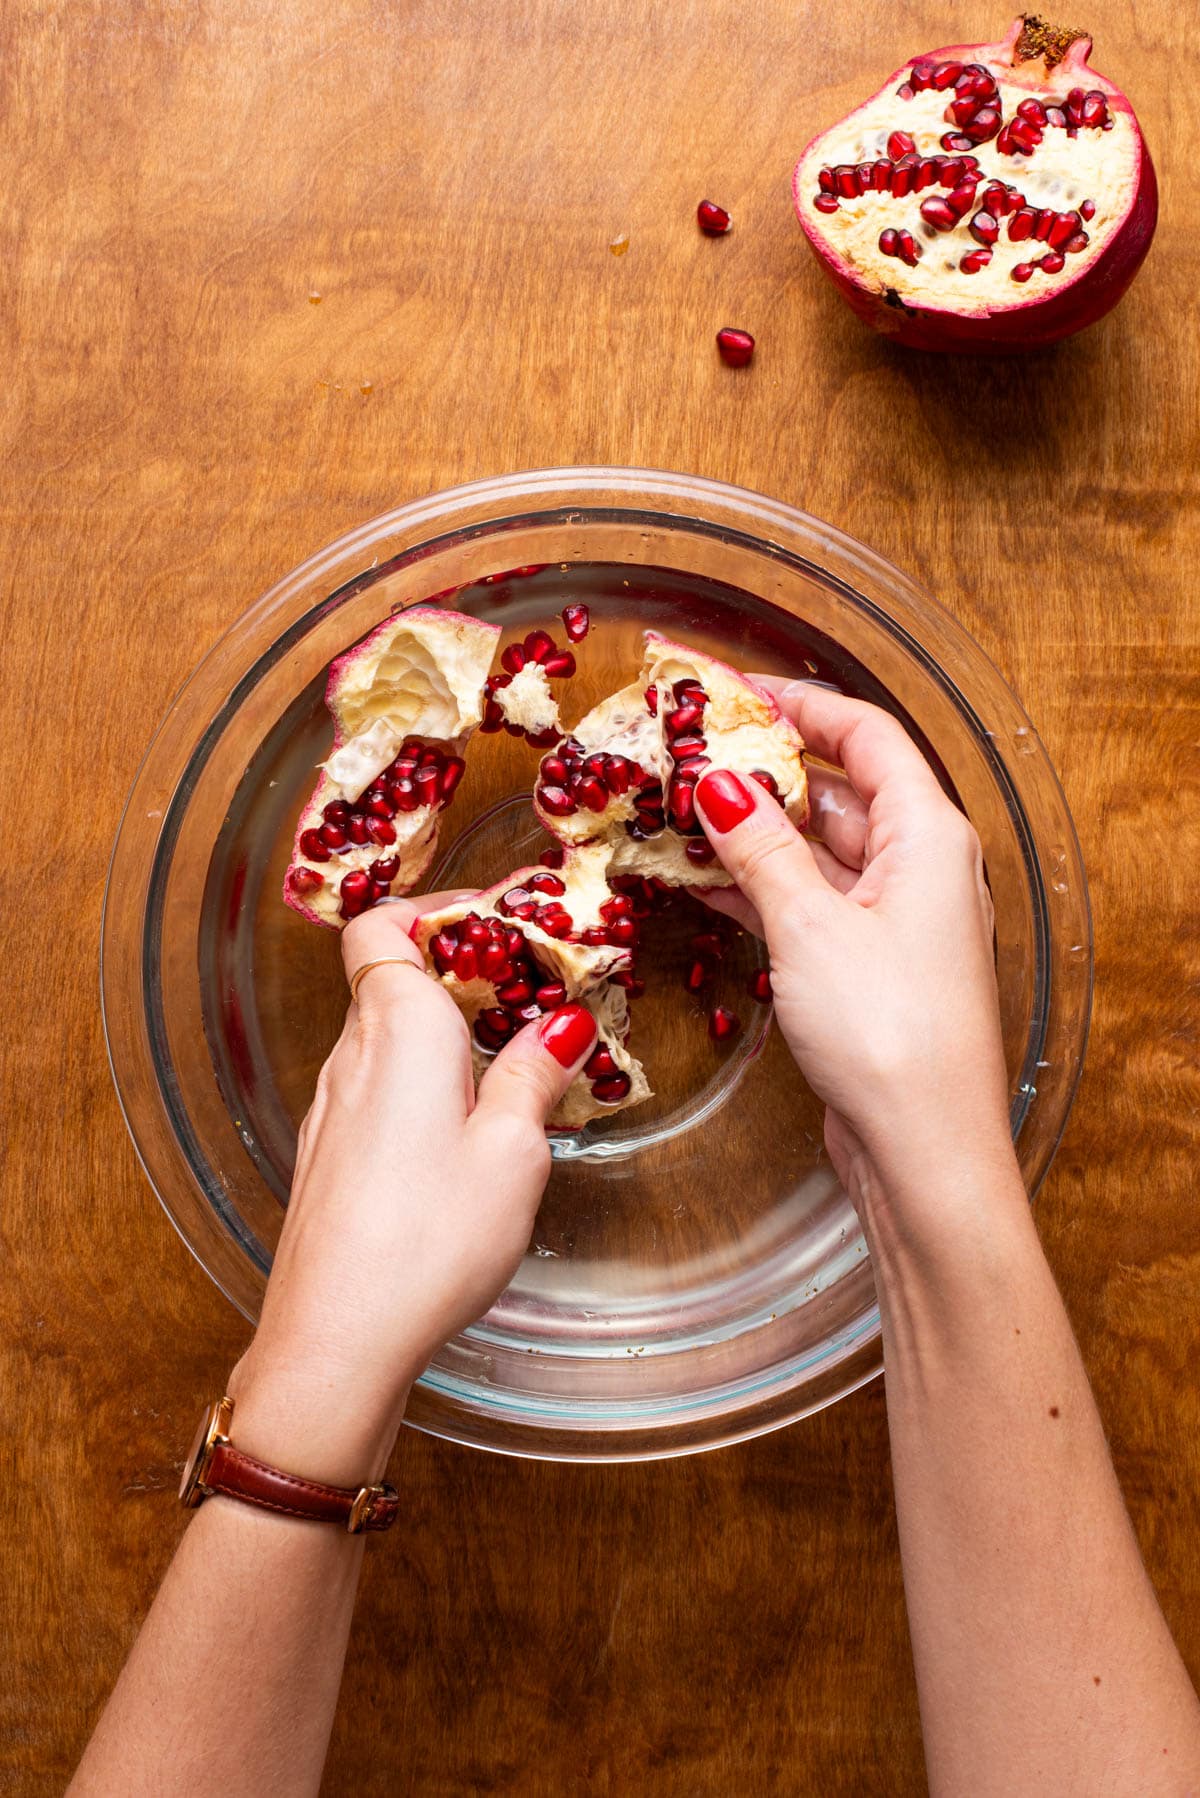 Woman's hands seeding pomegranate in a bowl of water.